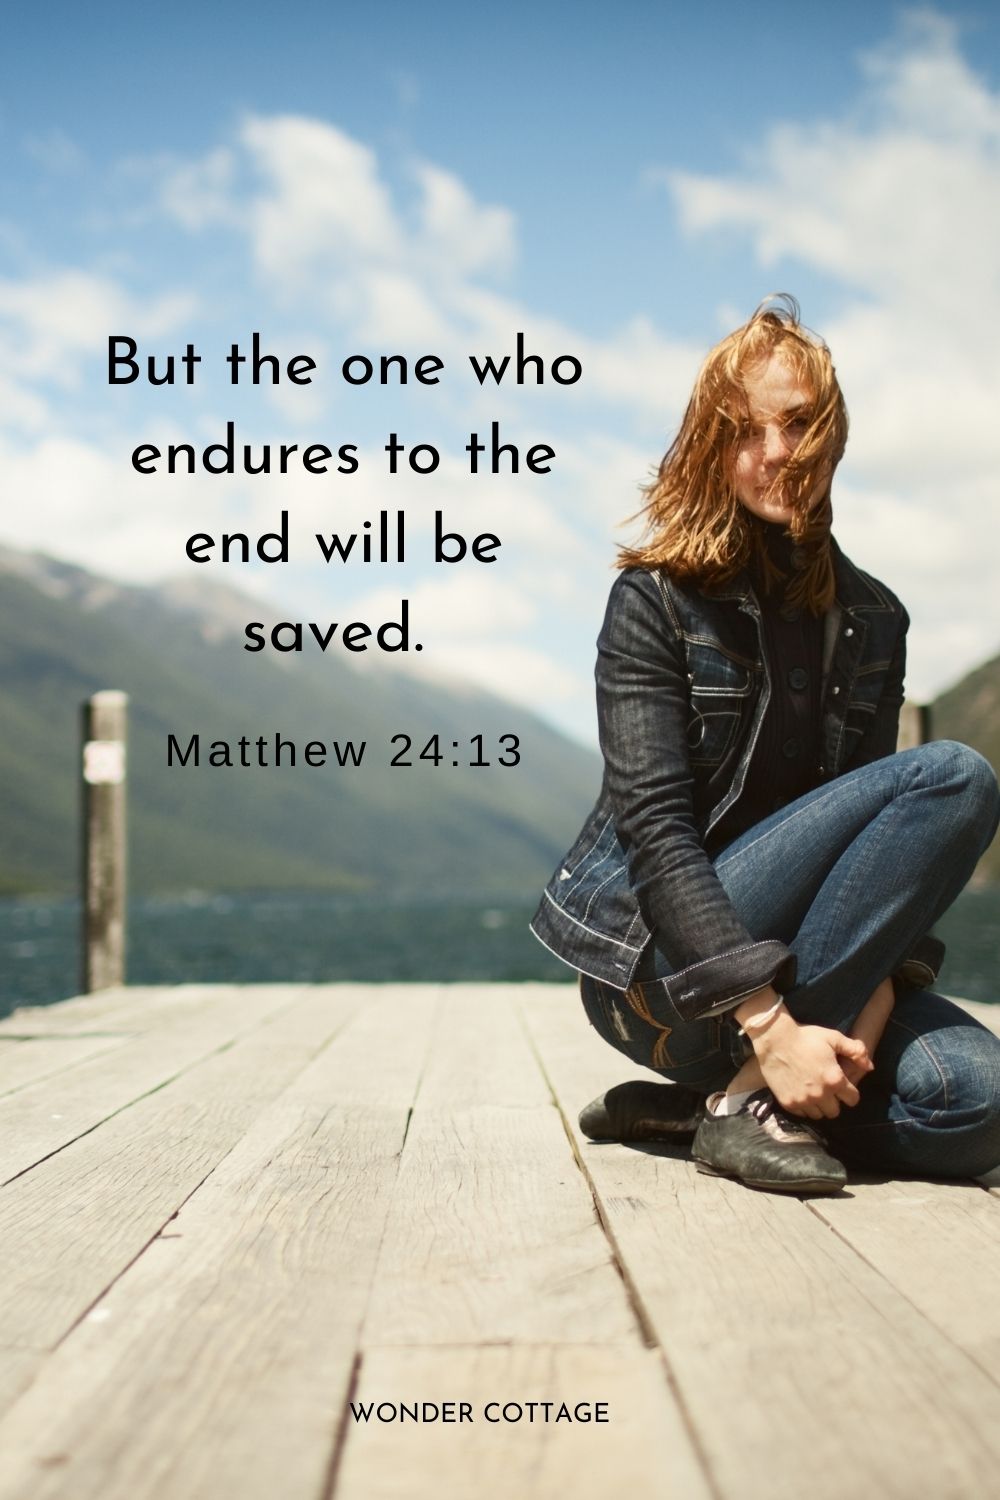 But the one who endures to the end will be saved. Matthew 24:13